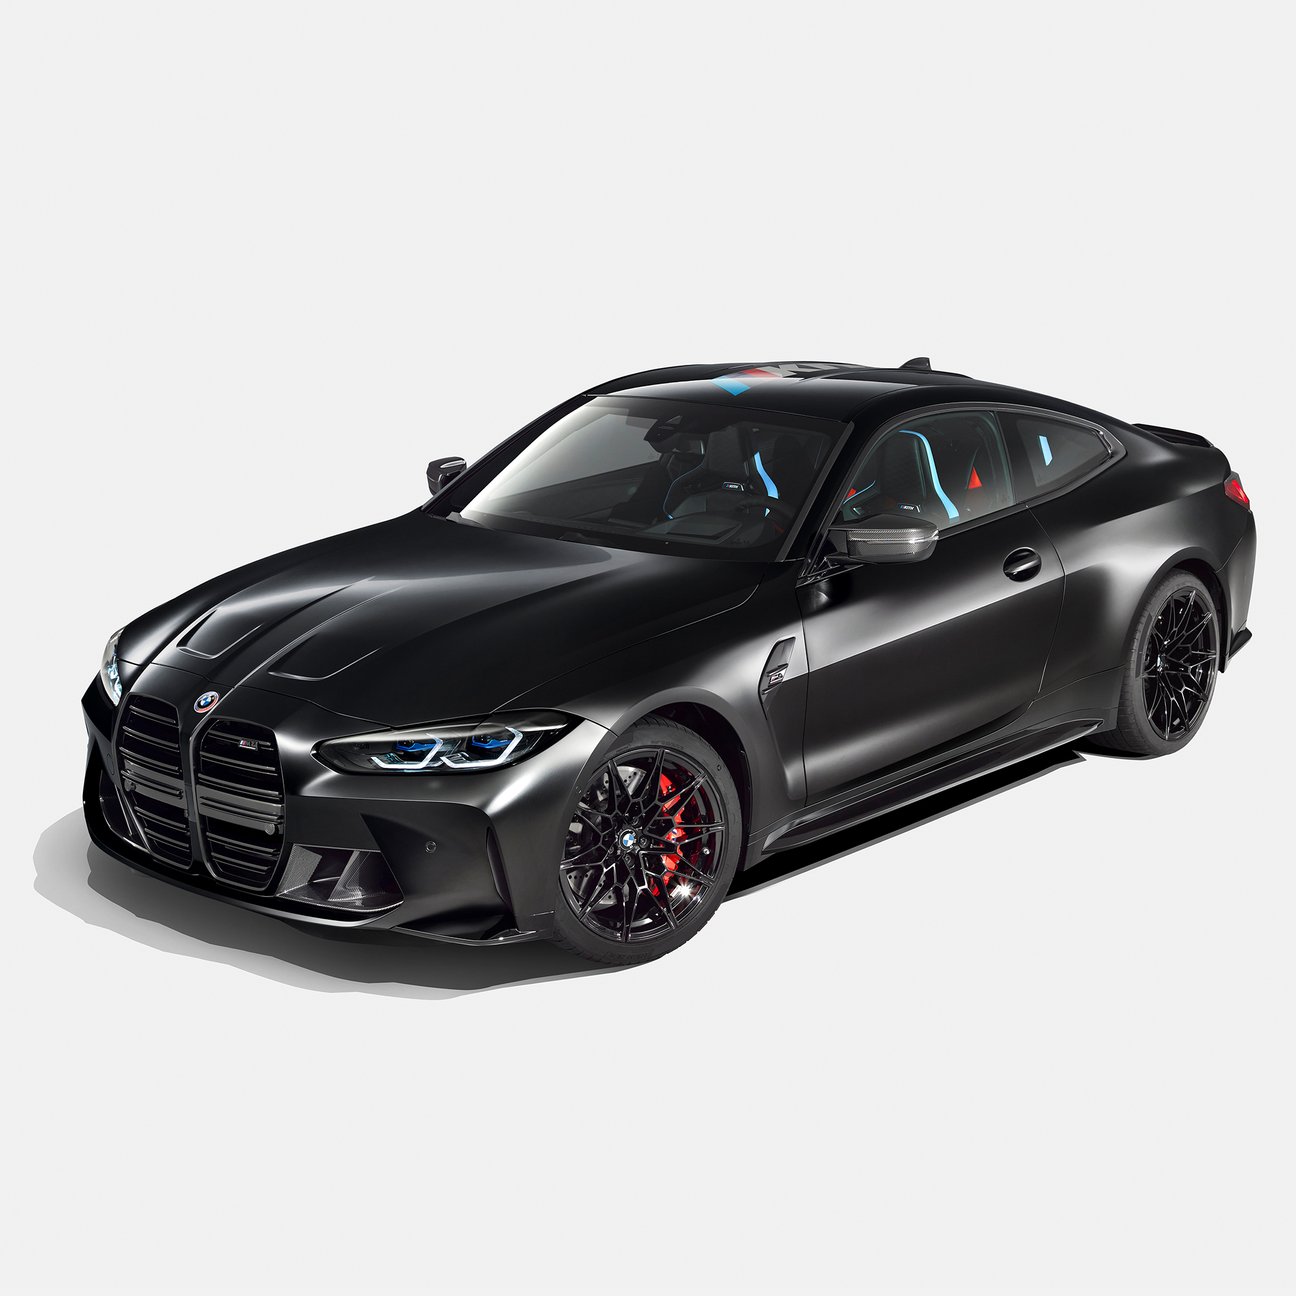 Kith's Comprehensive BMW Collaboration Includes an Impressive 2022 BMW M4 -  COOL HUNTING®